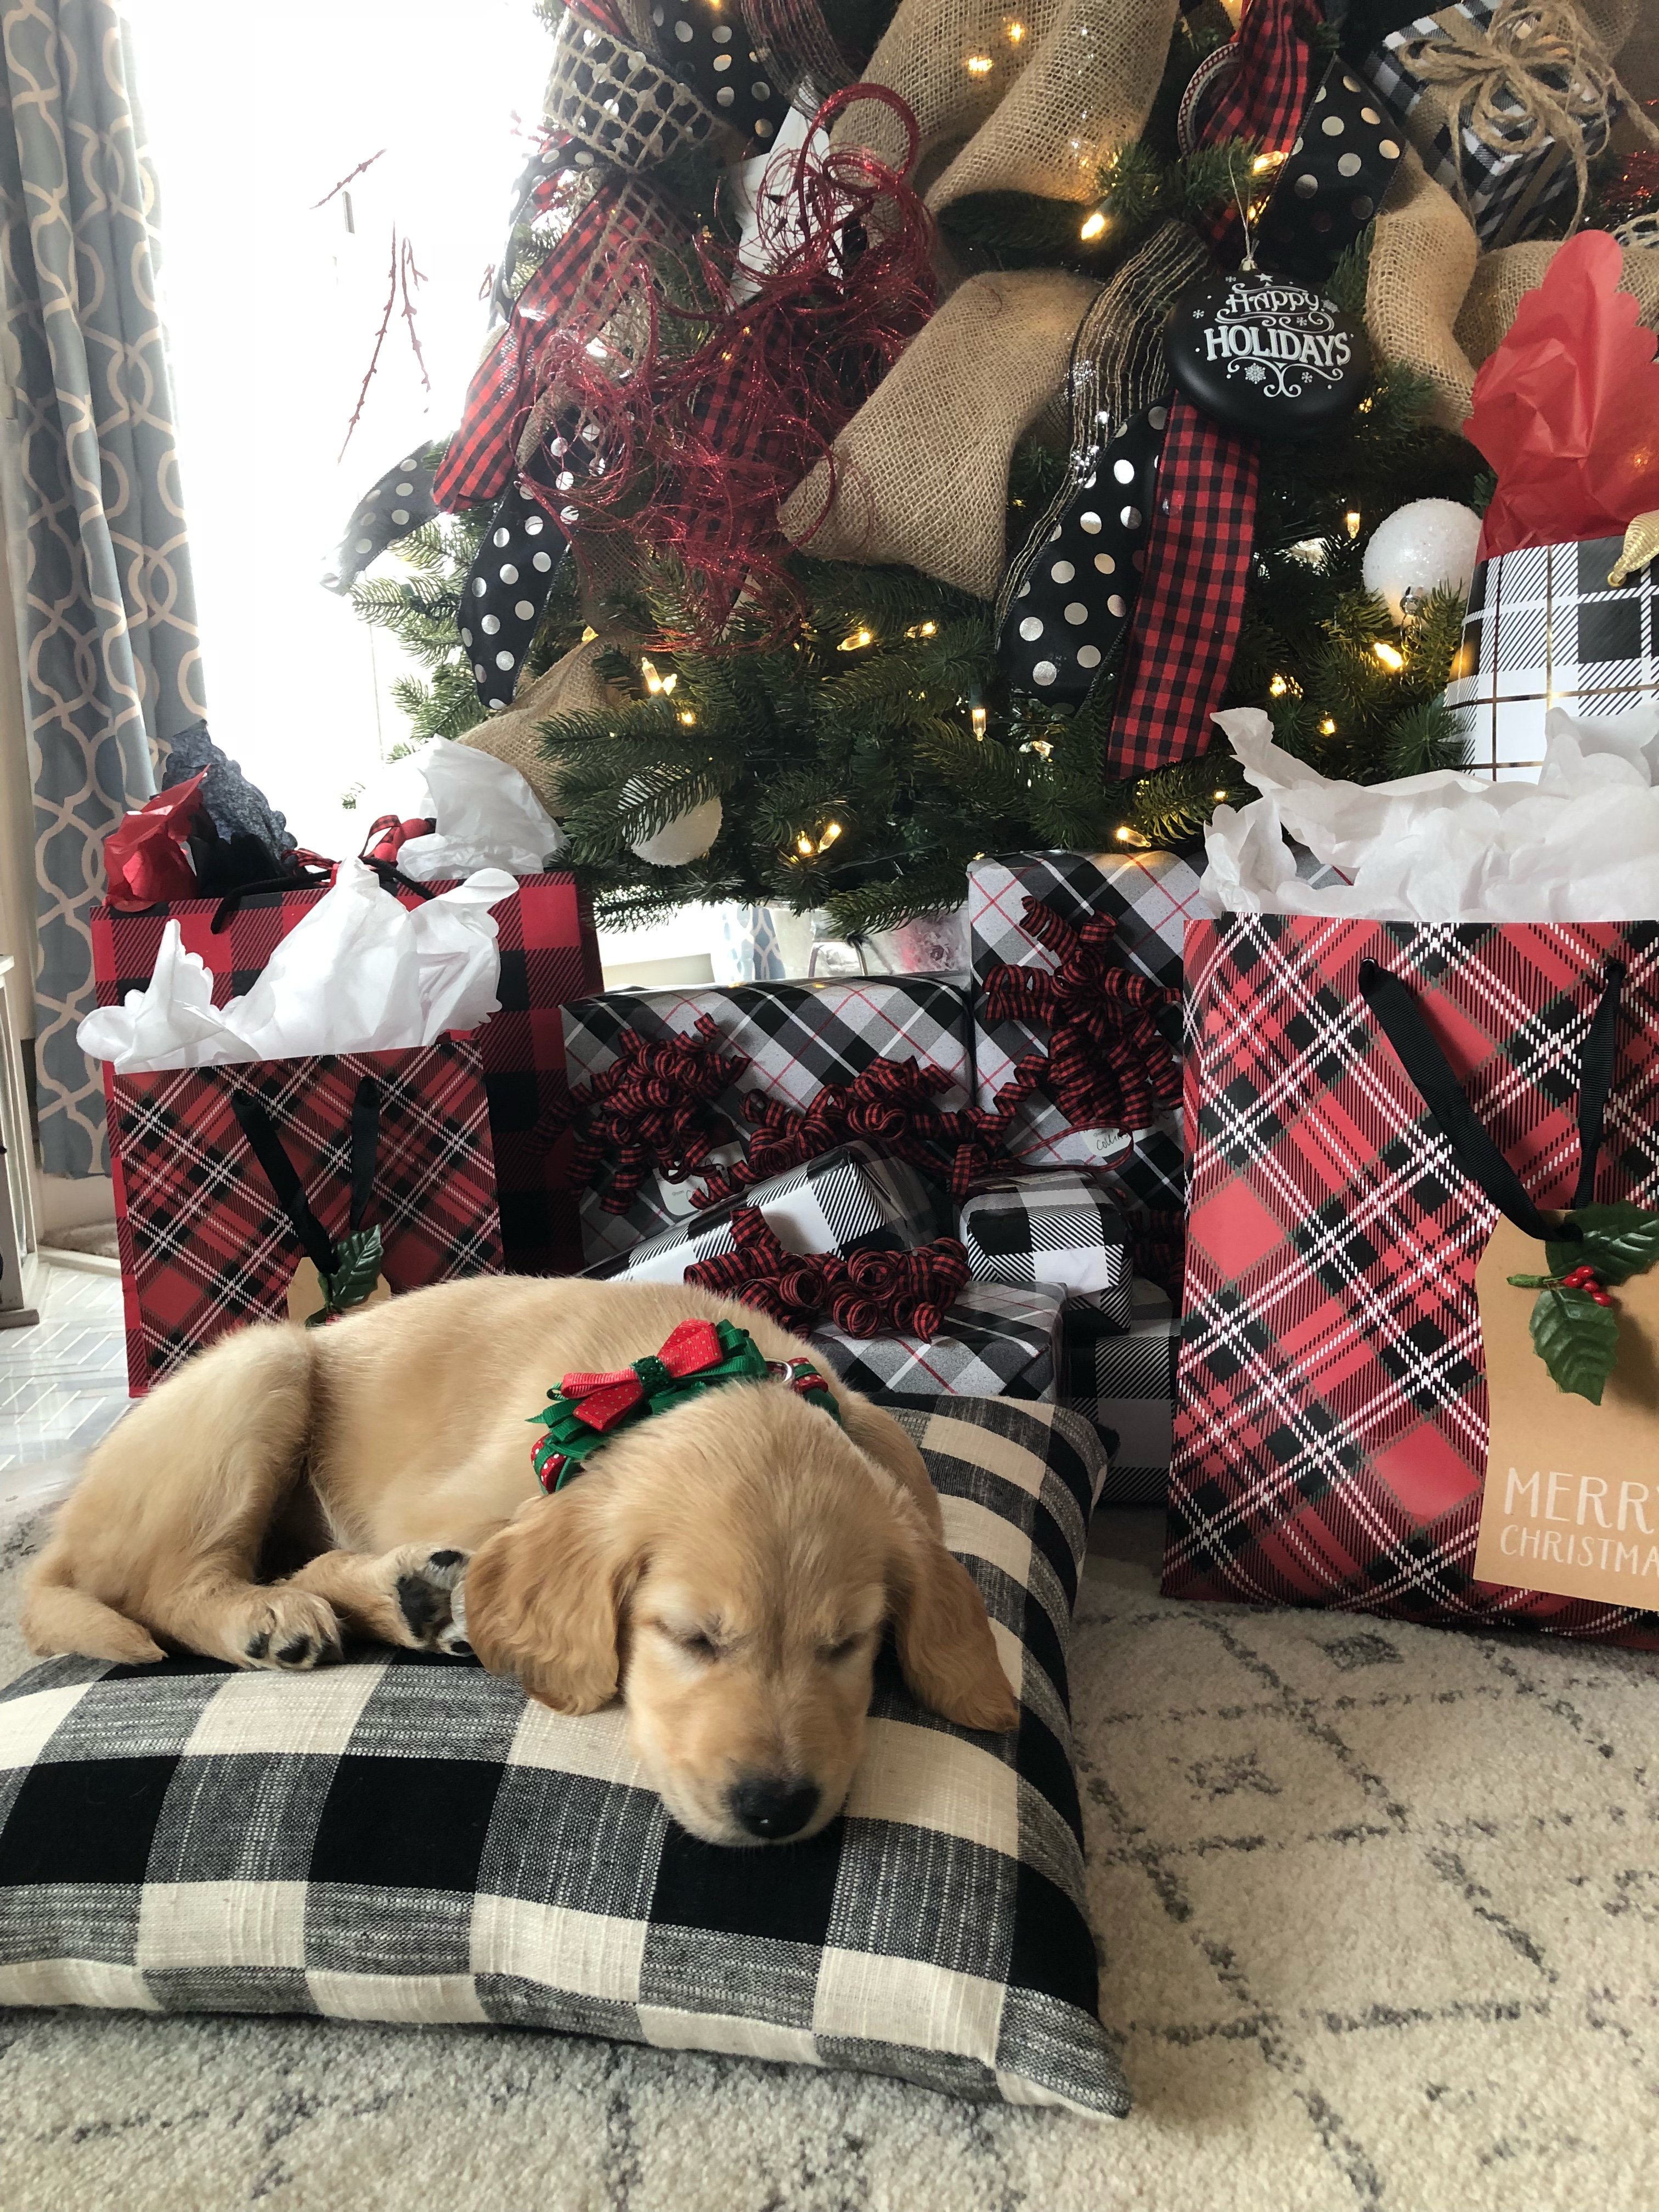 Surprise Christmas puppy under the tree, golden retriever with wrapped ...